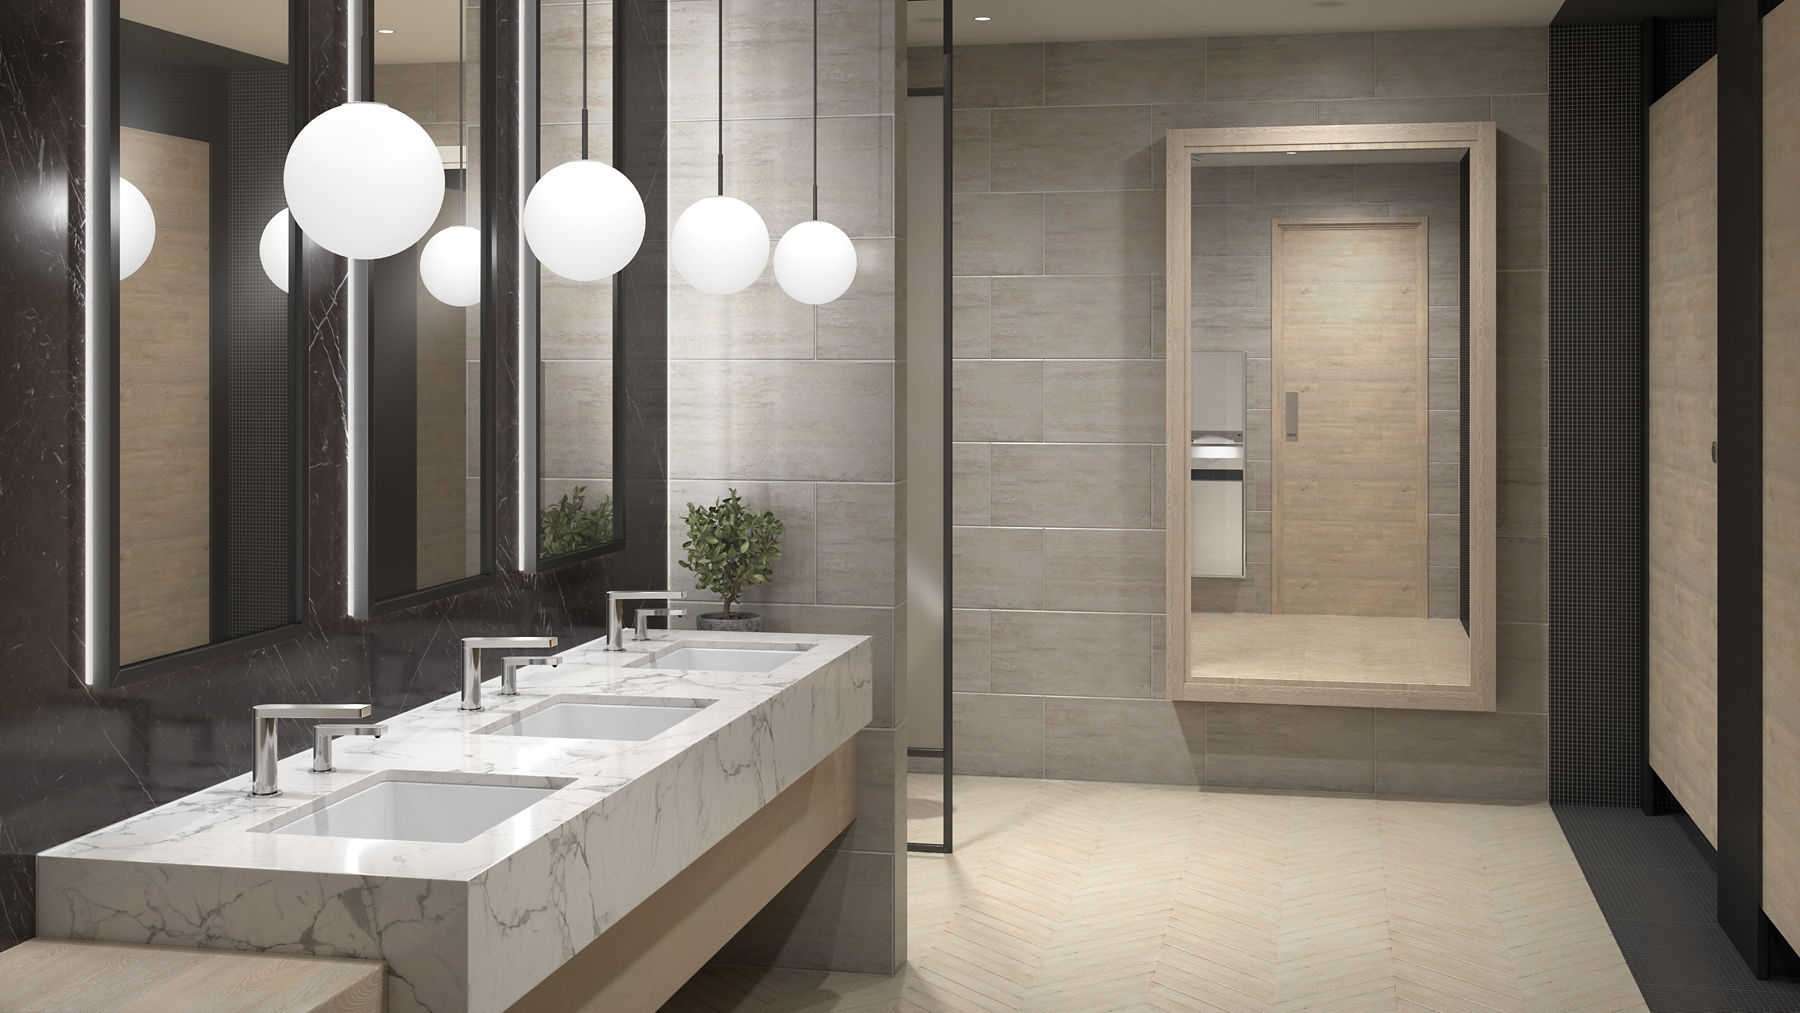 Toilets, Showers, Sinks, Faucets and More for Bathroom  Kitchen | KOHLER